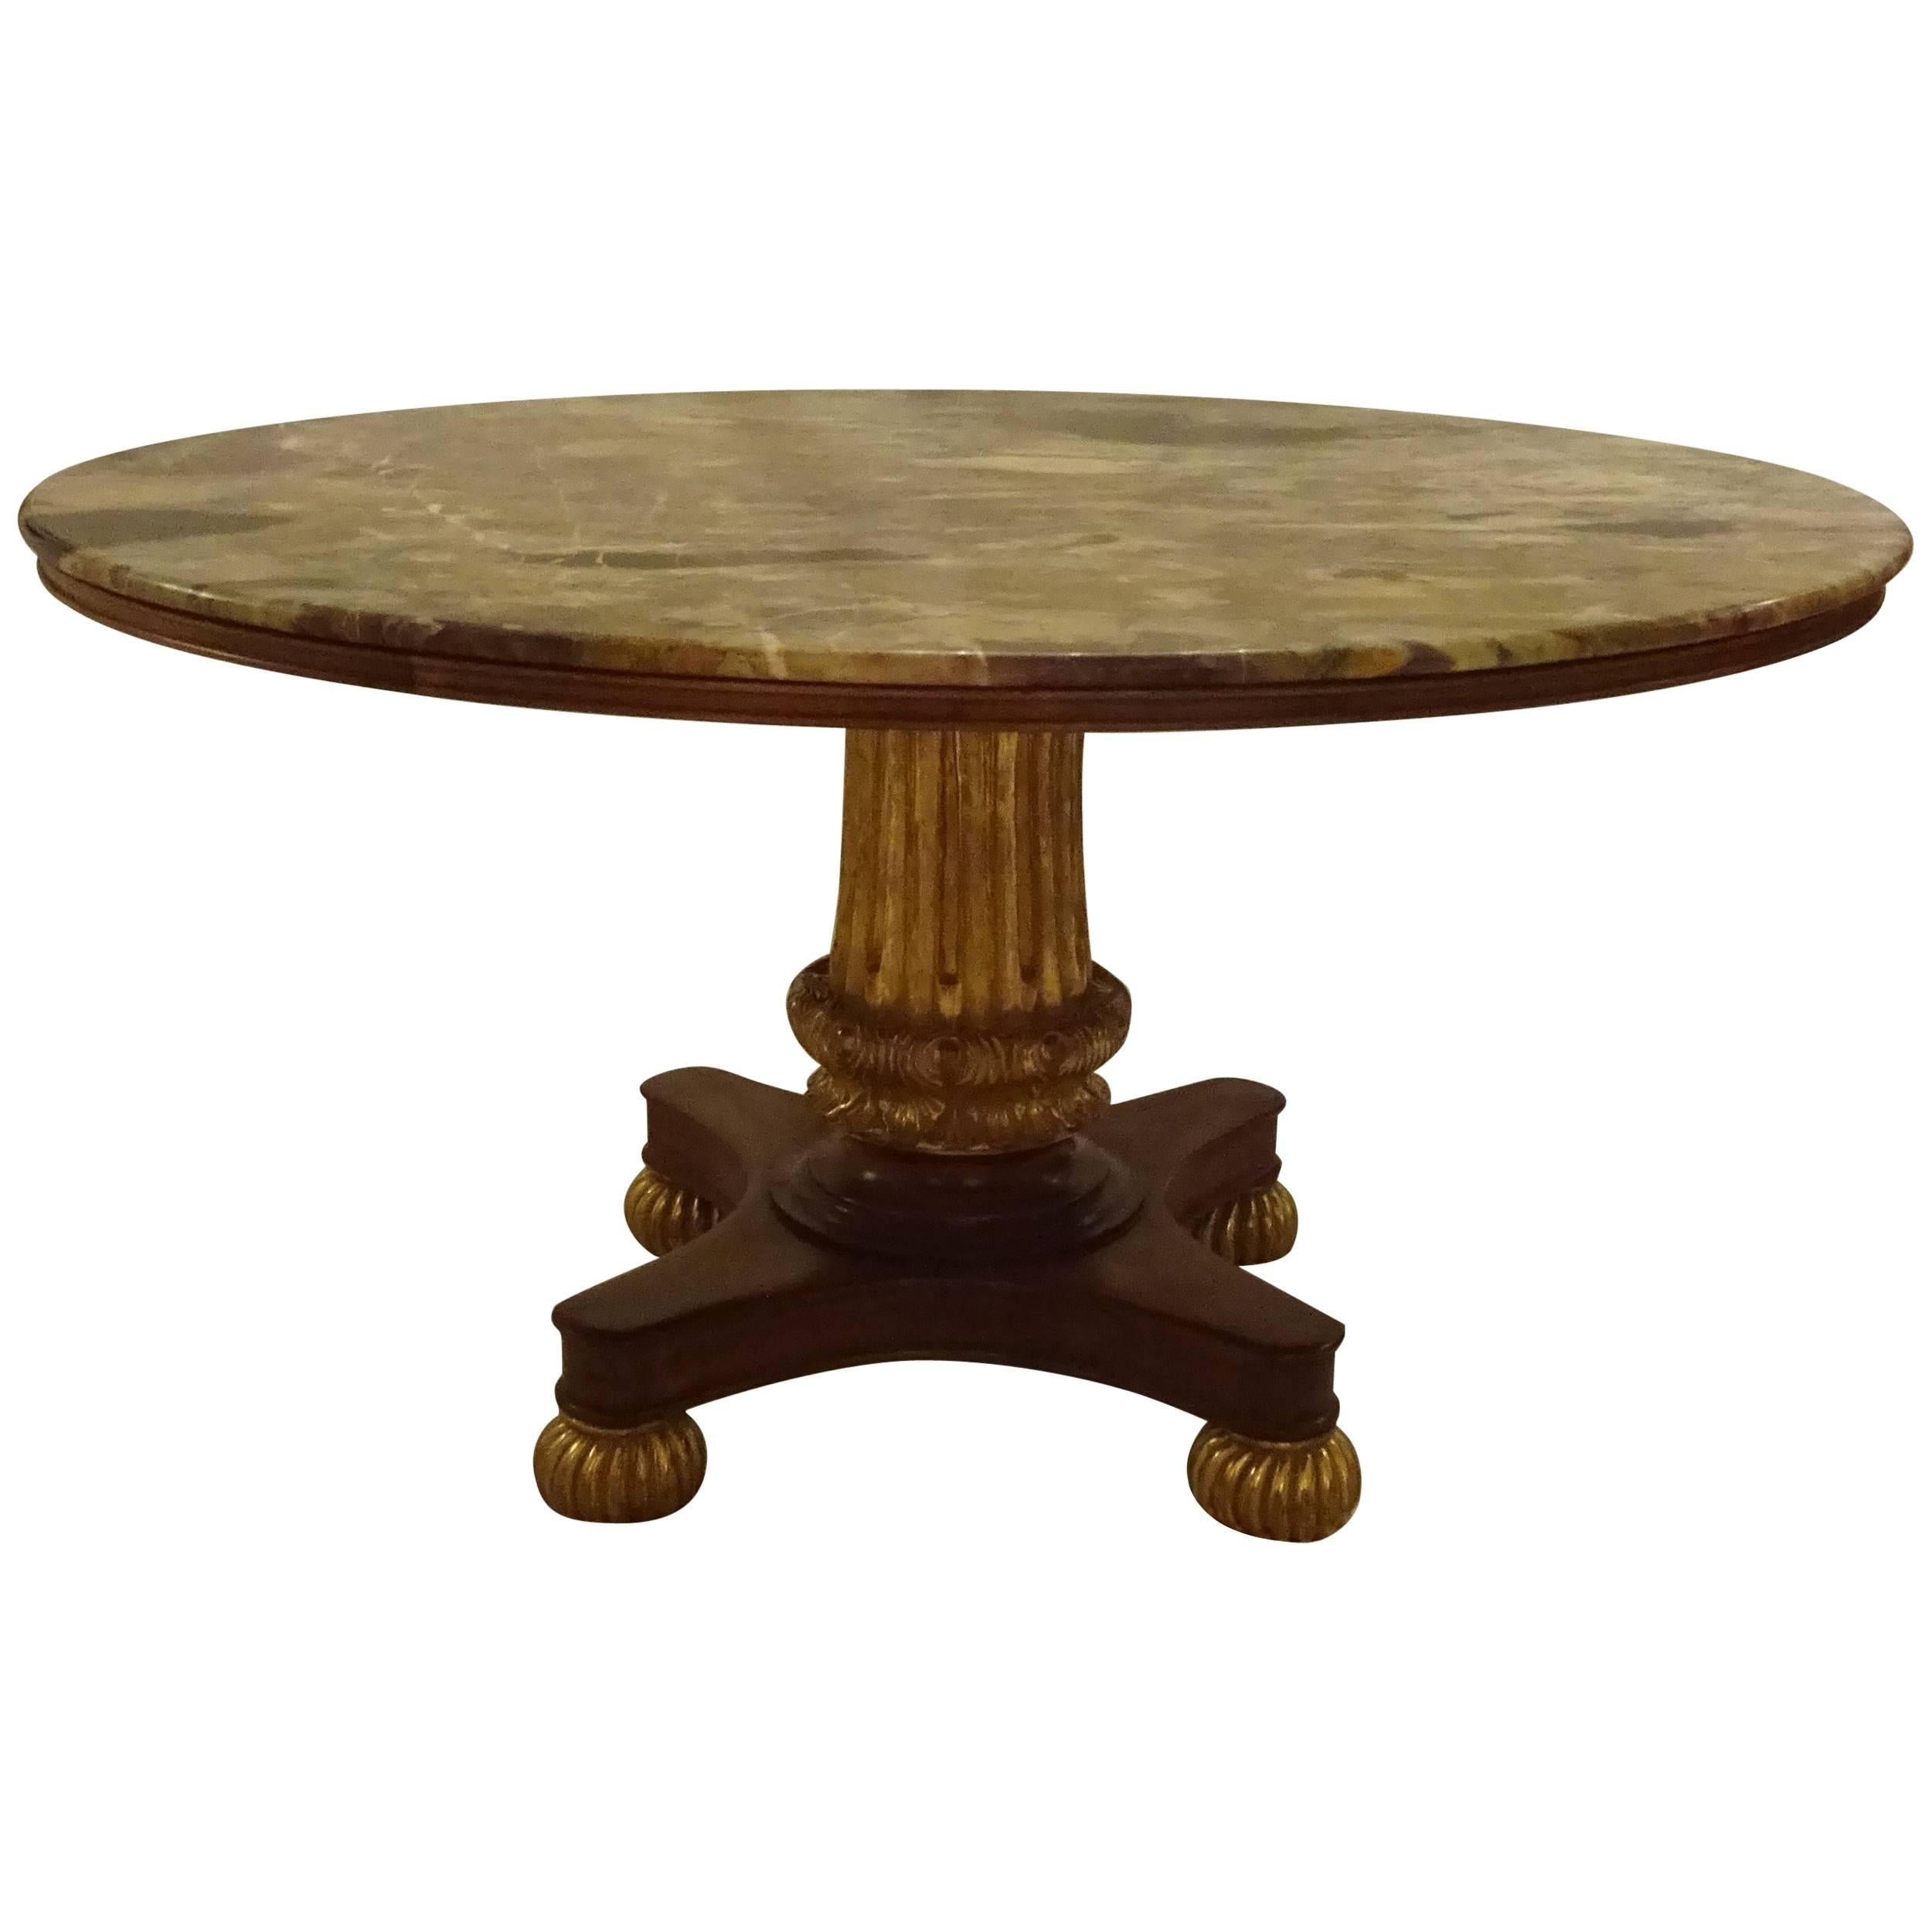 Round table.
Marble-top 